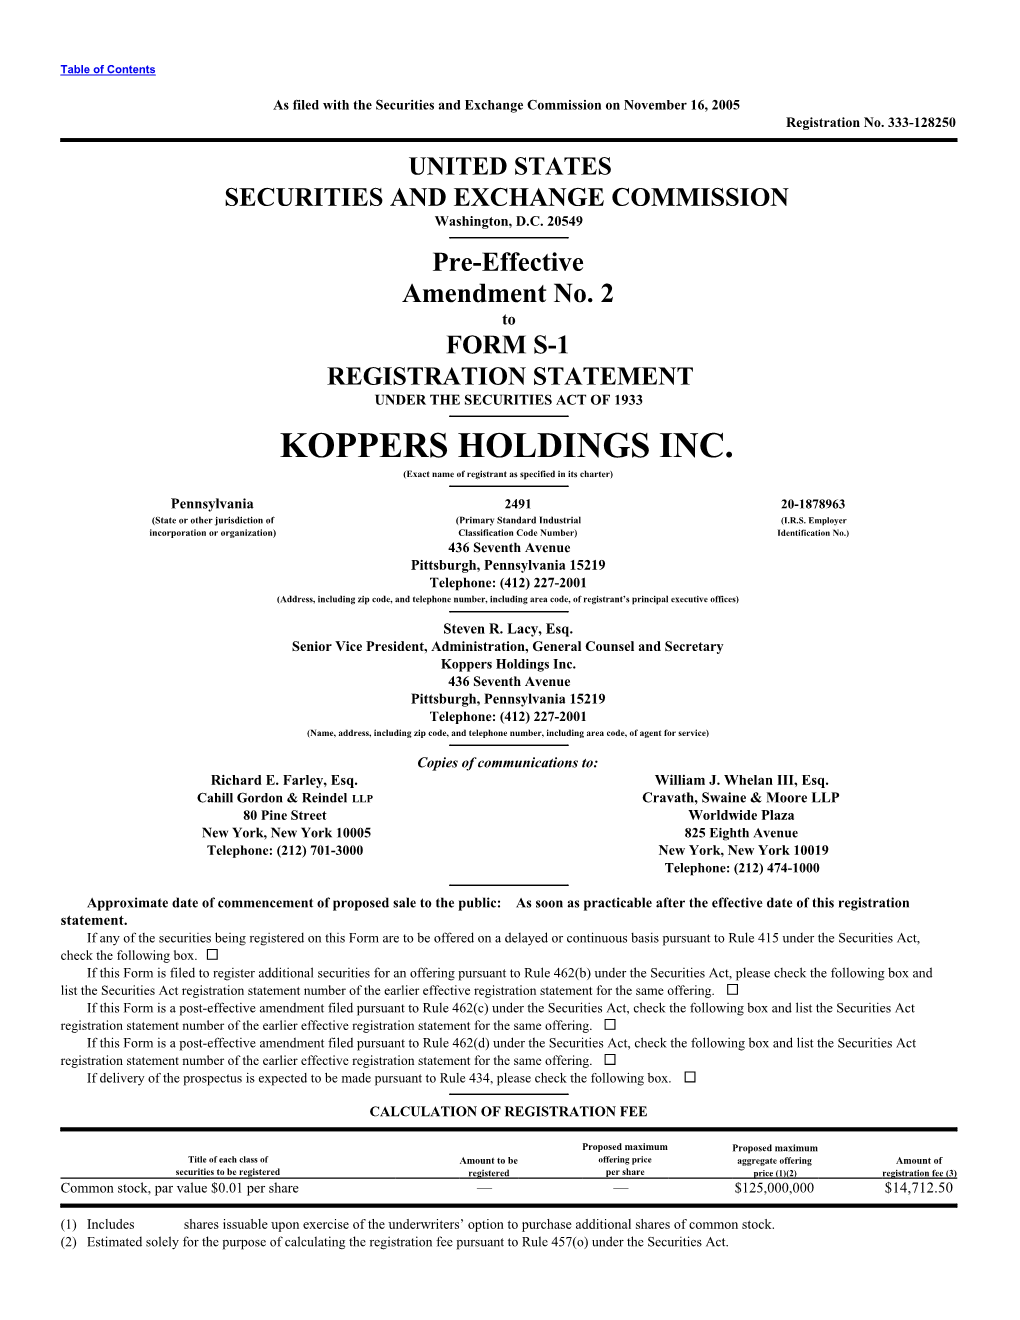 KOPPERS HOLDINGS INC. (Exact Name of Registrant As Specified in Its Charter)